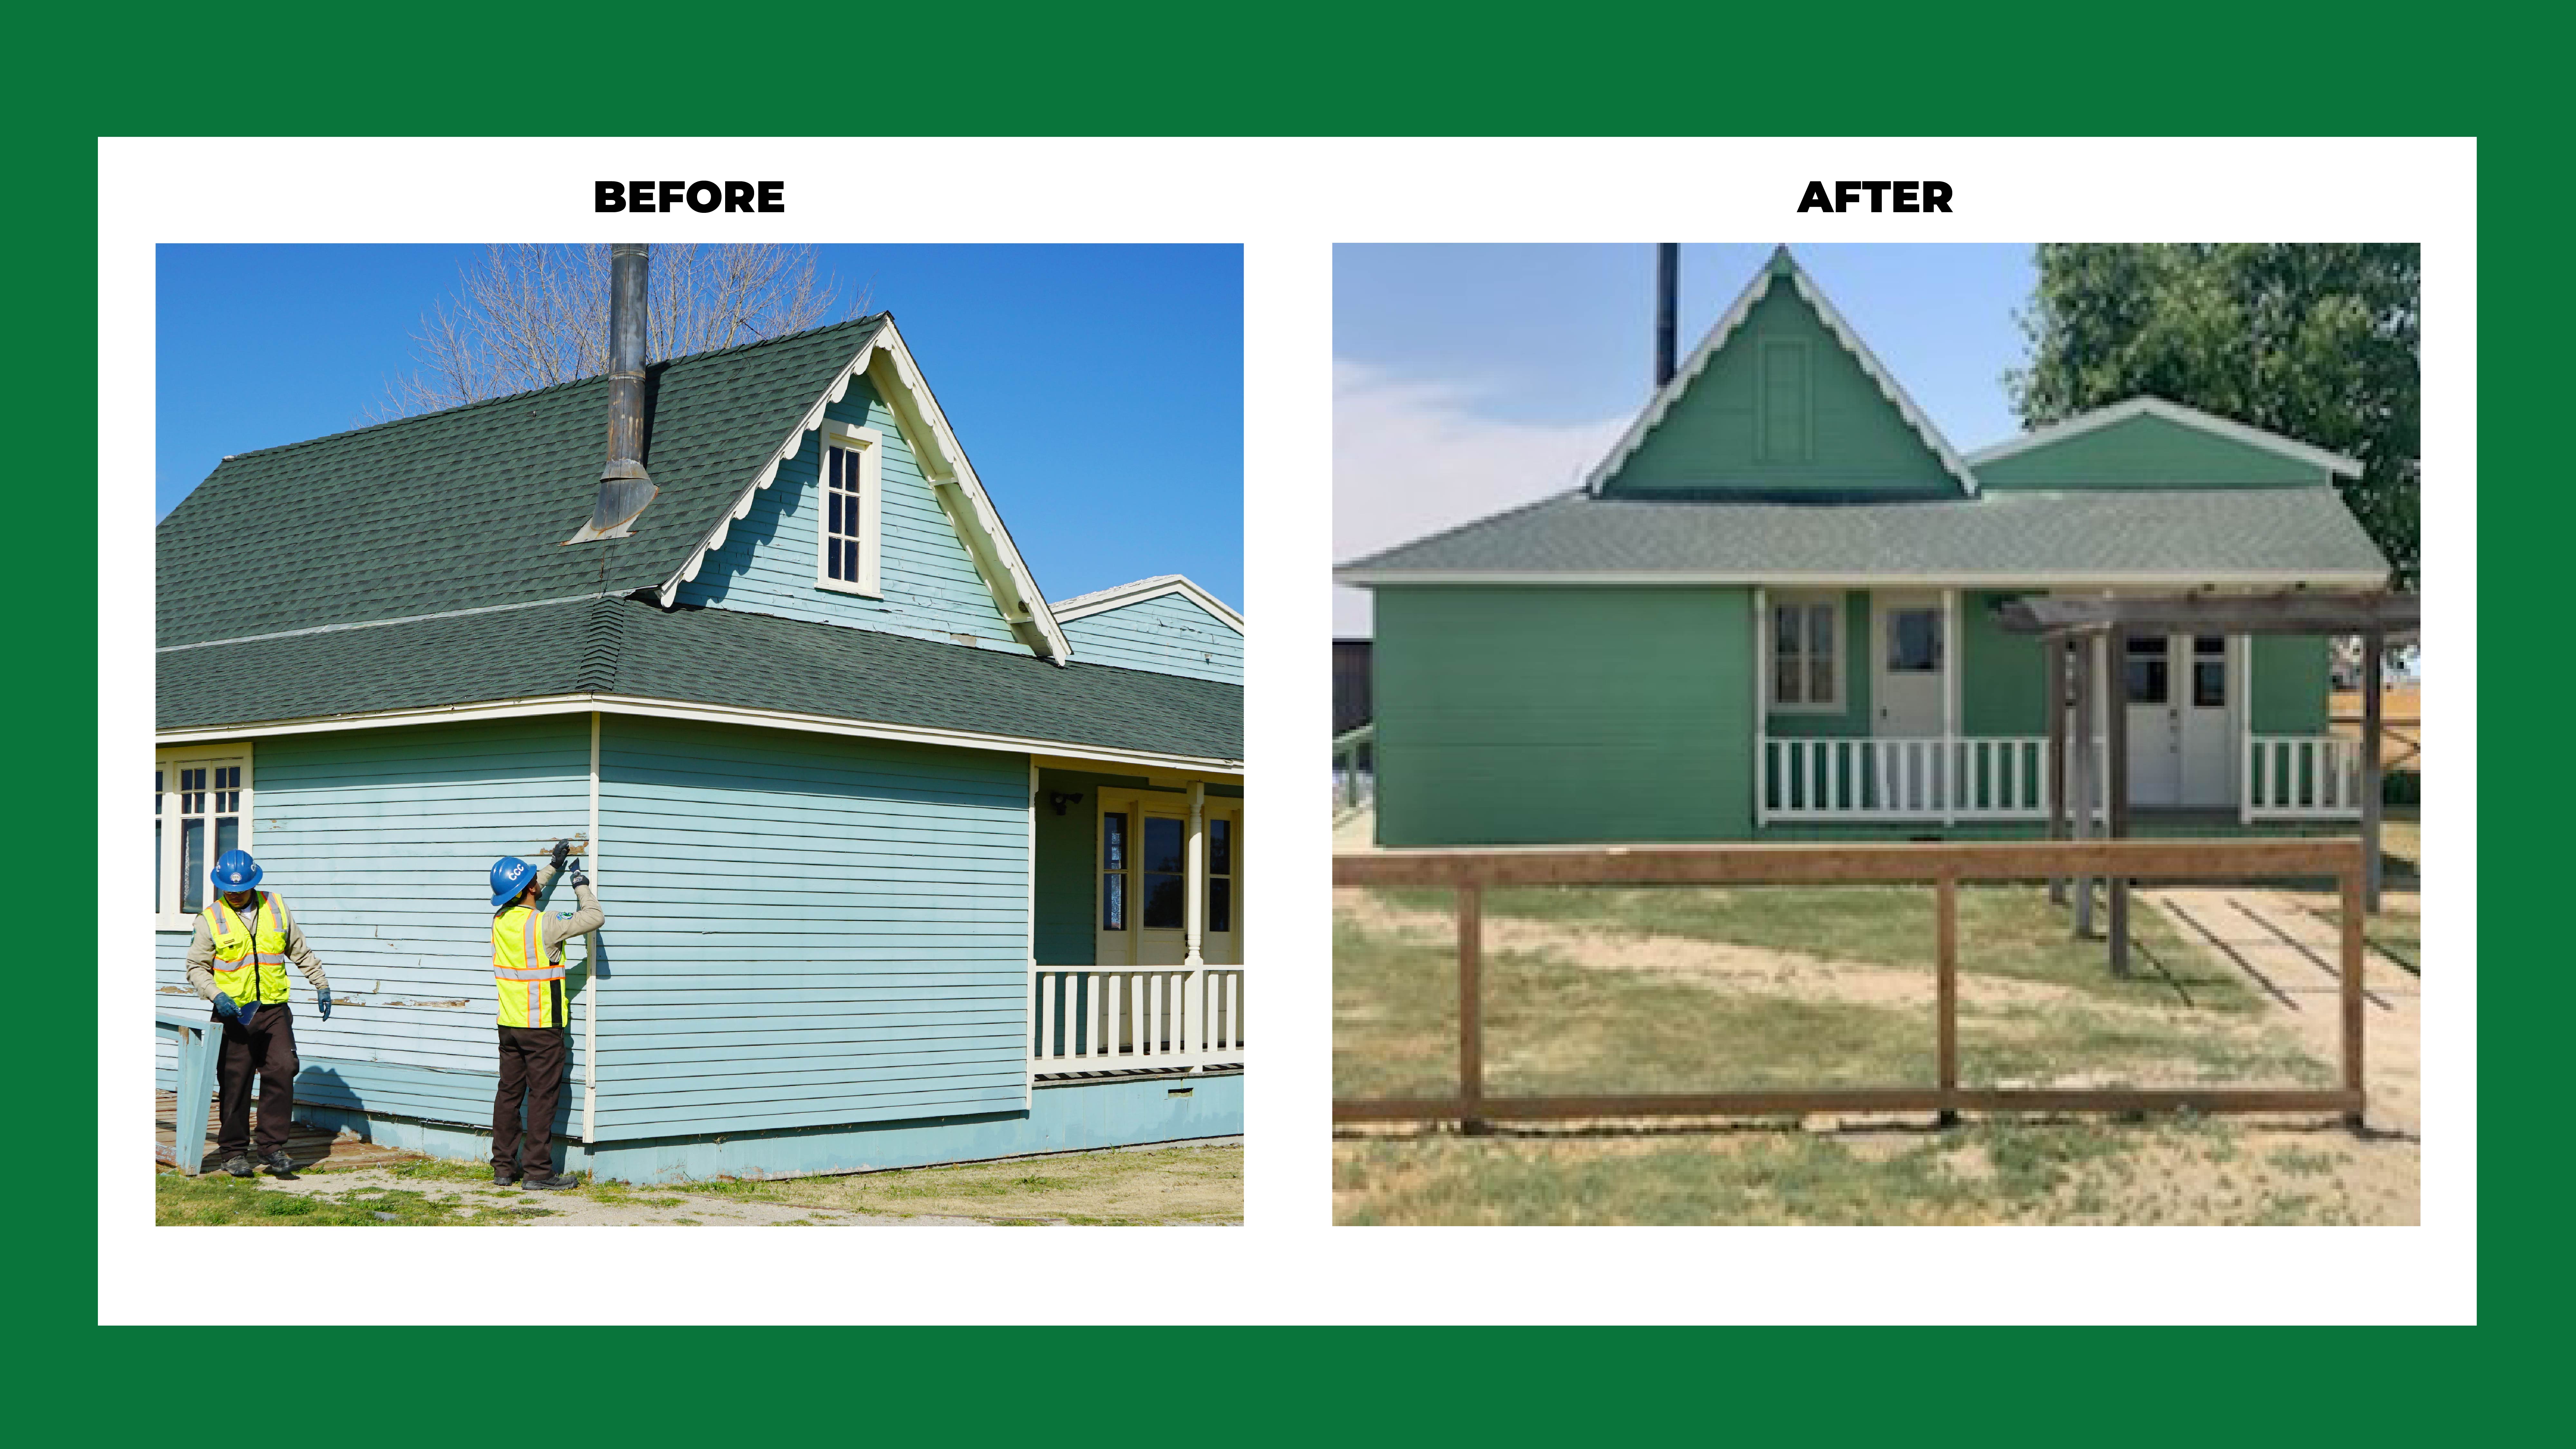 Allensworth House before and after restoration